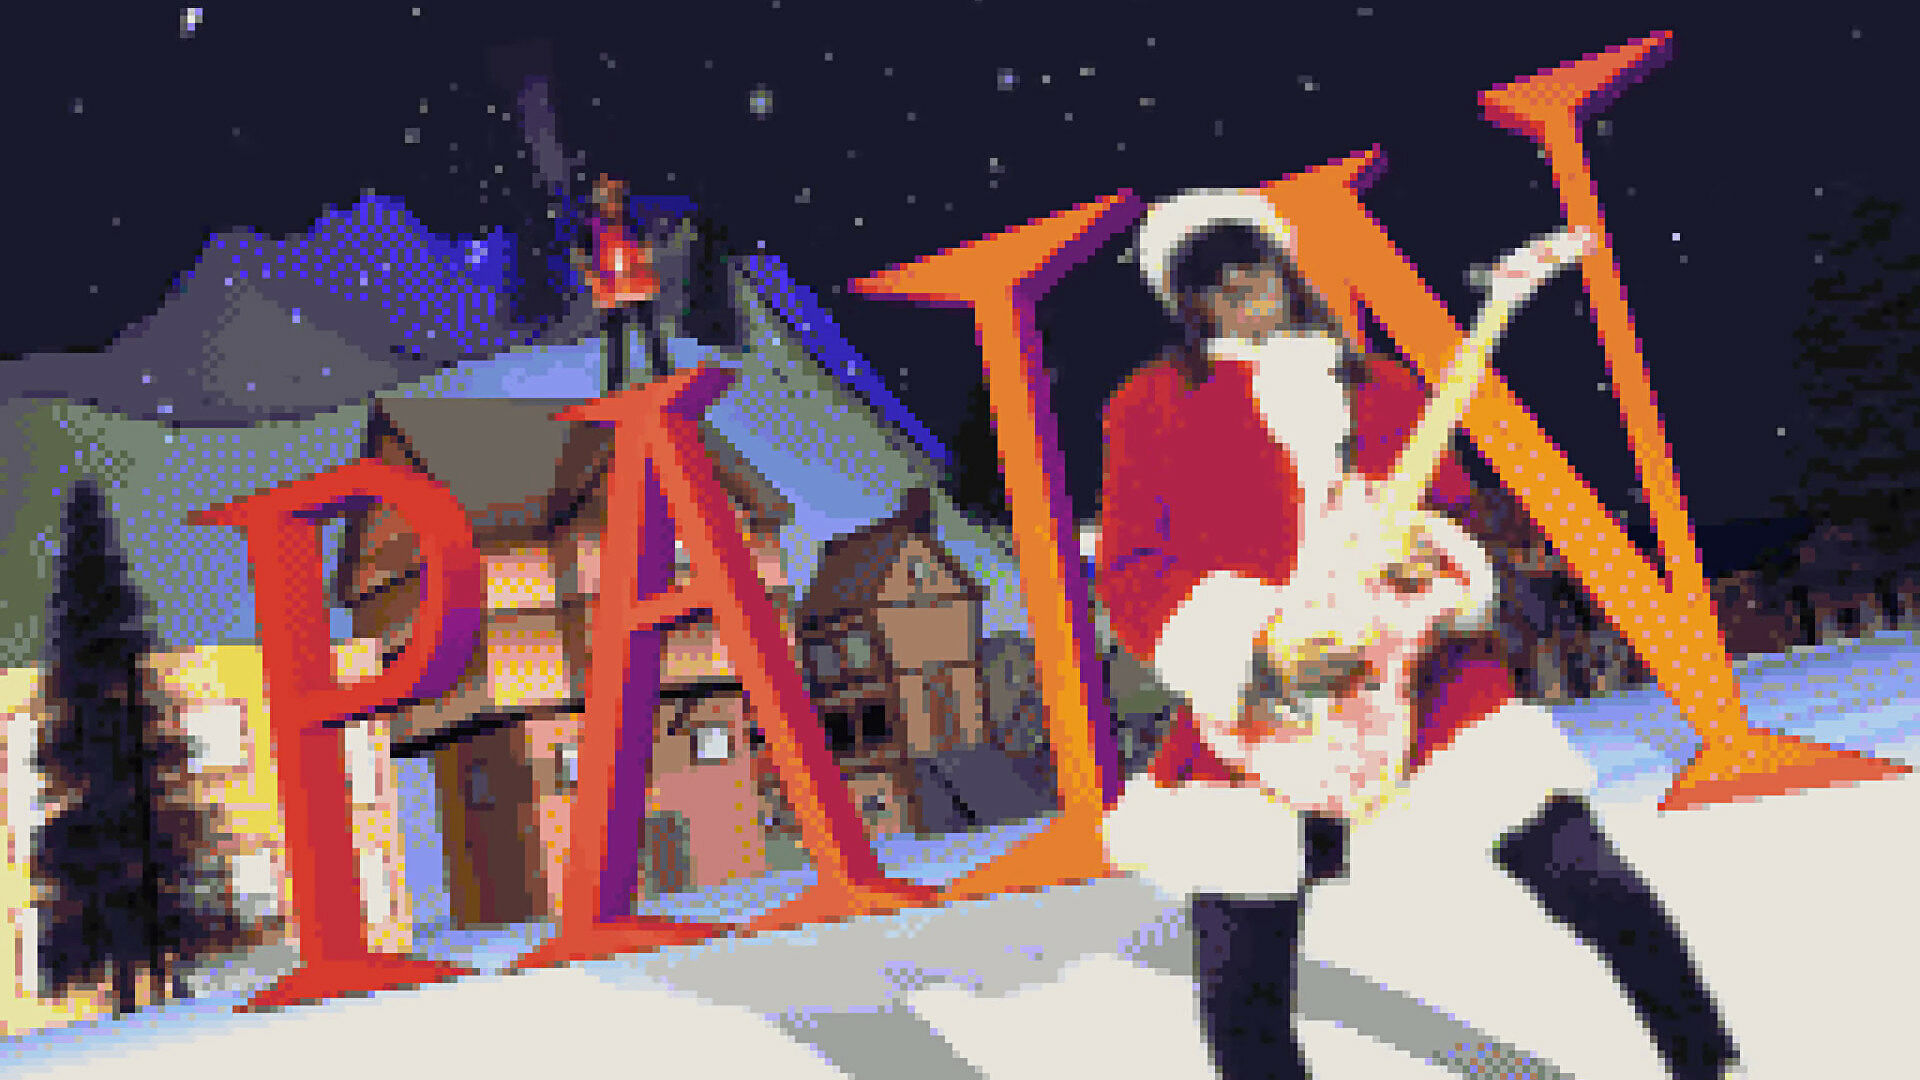 It is time to listen to Christmas Pain In Christmas Town